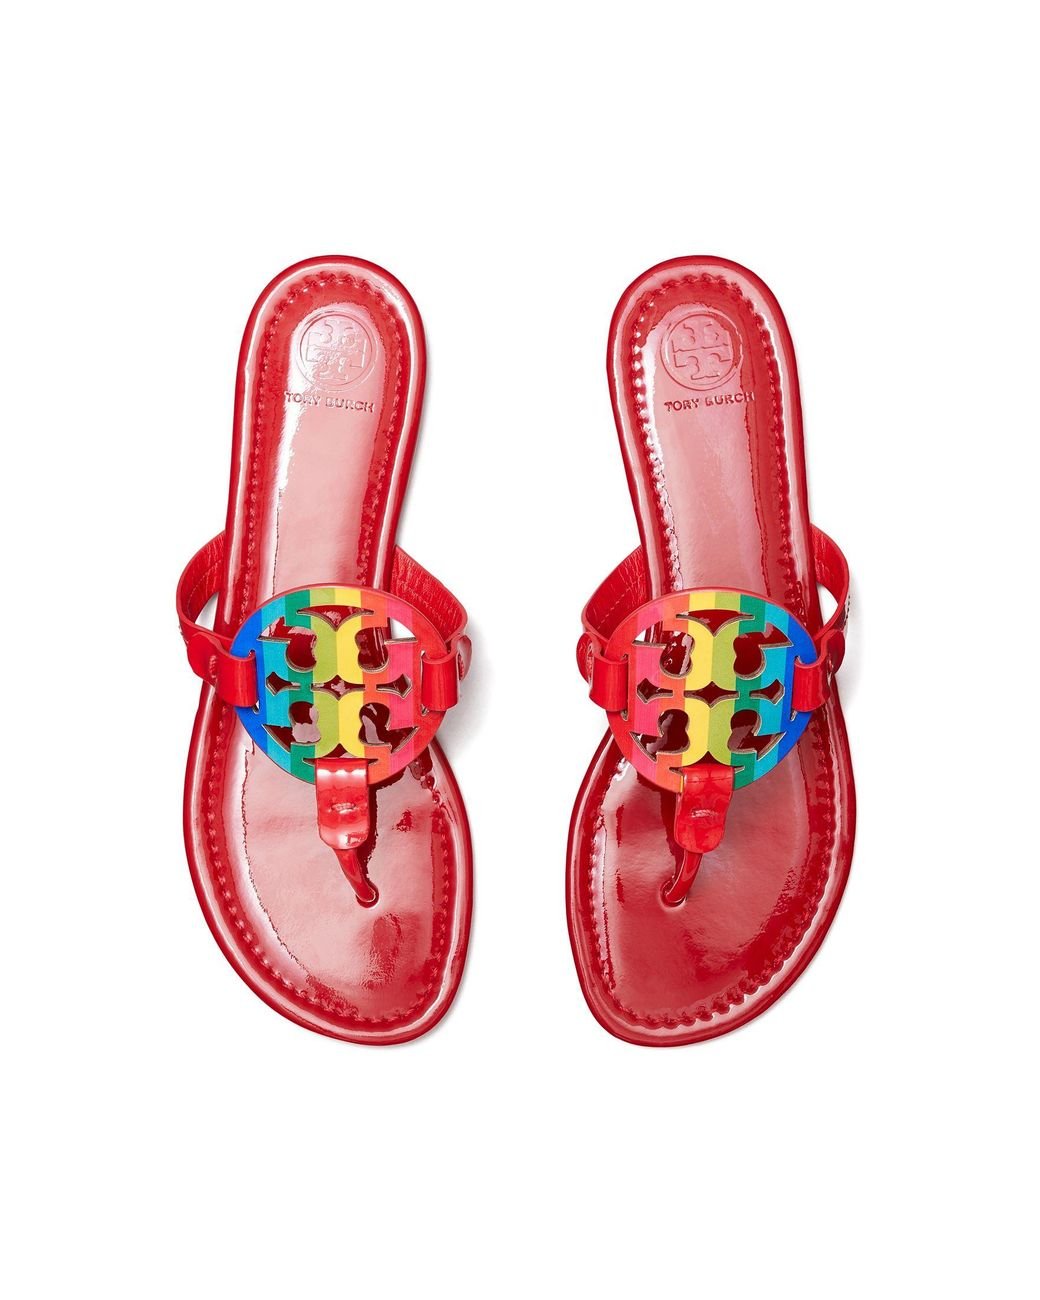 Tory Burch Miller Sandal, Printed Patent Leather in Red | Lyst